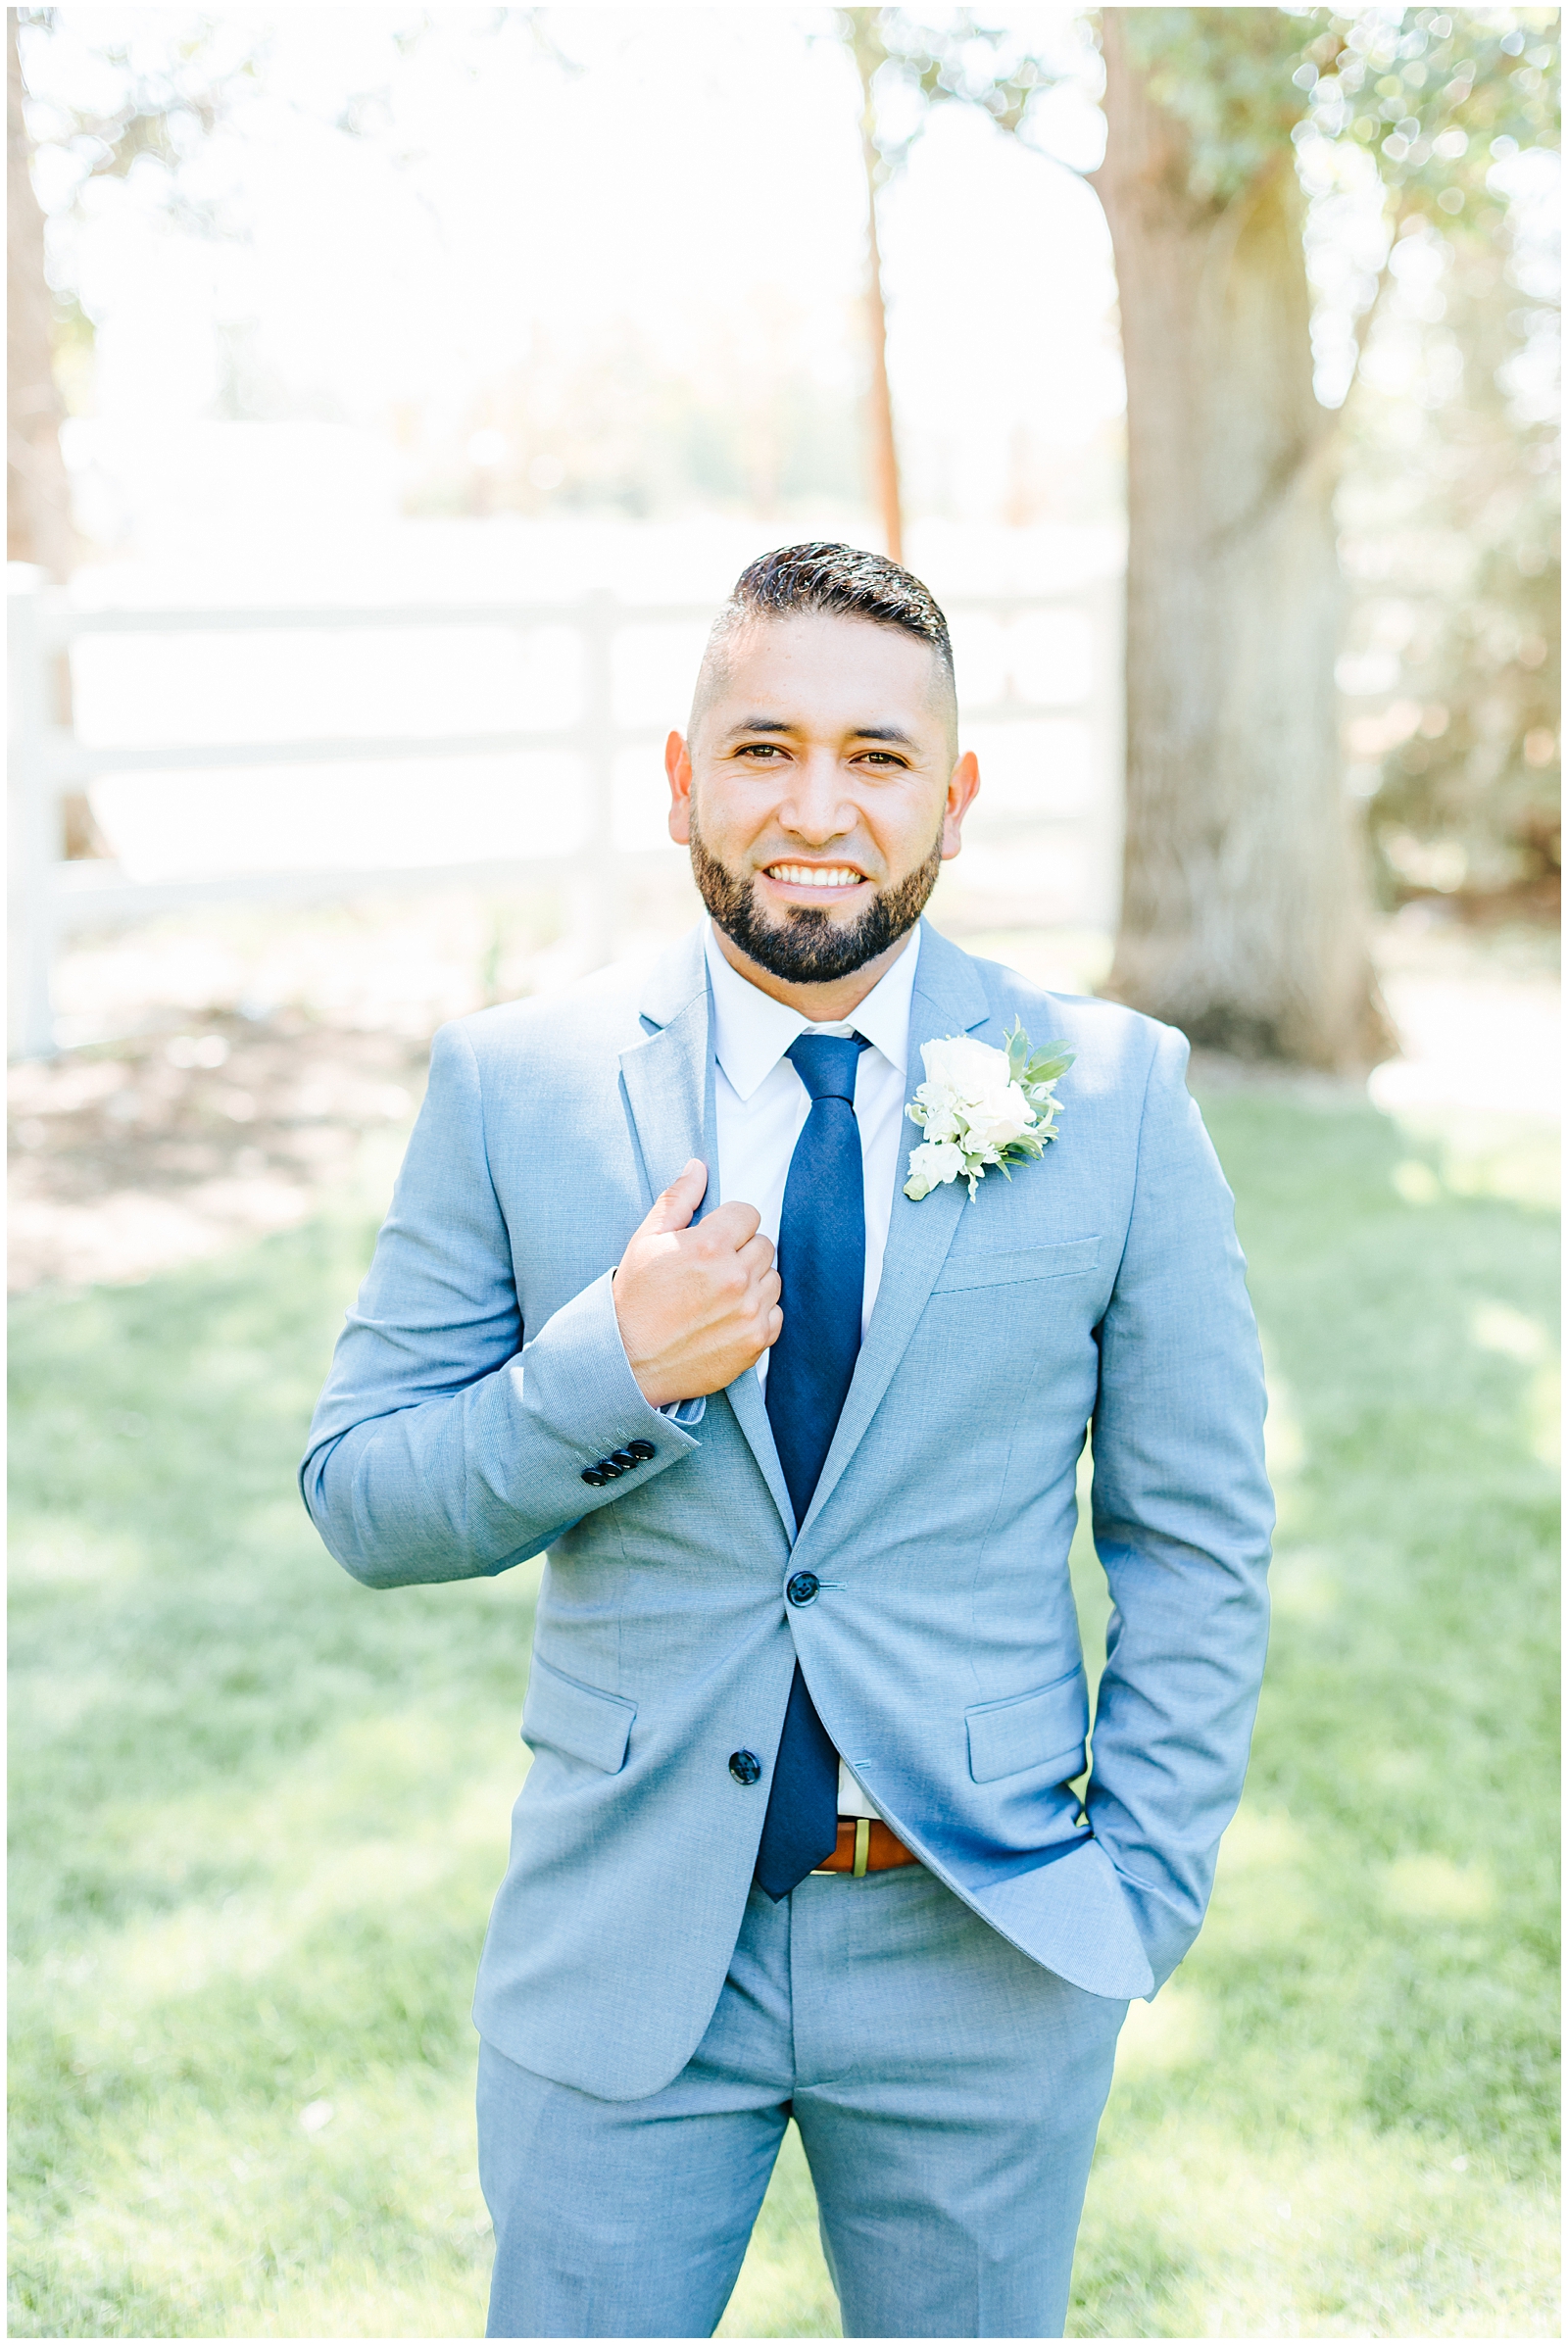 Grey suit with Navy Tie for the Groom